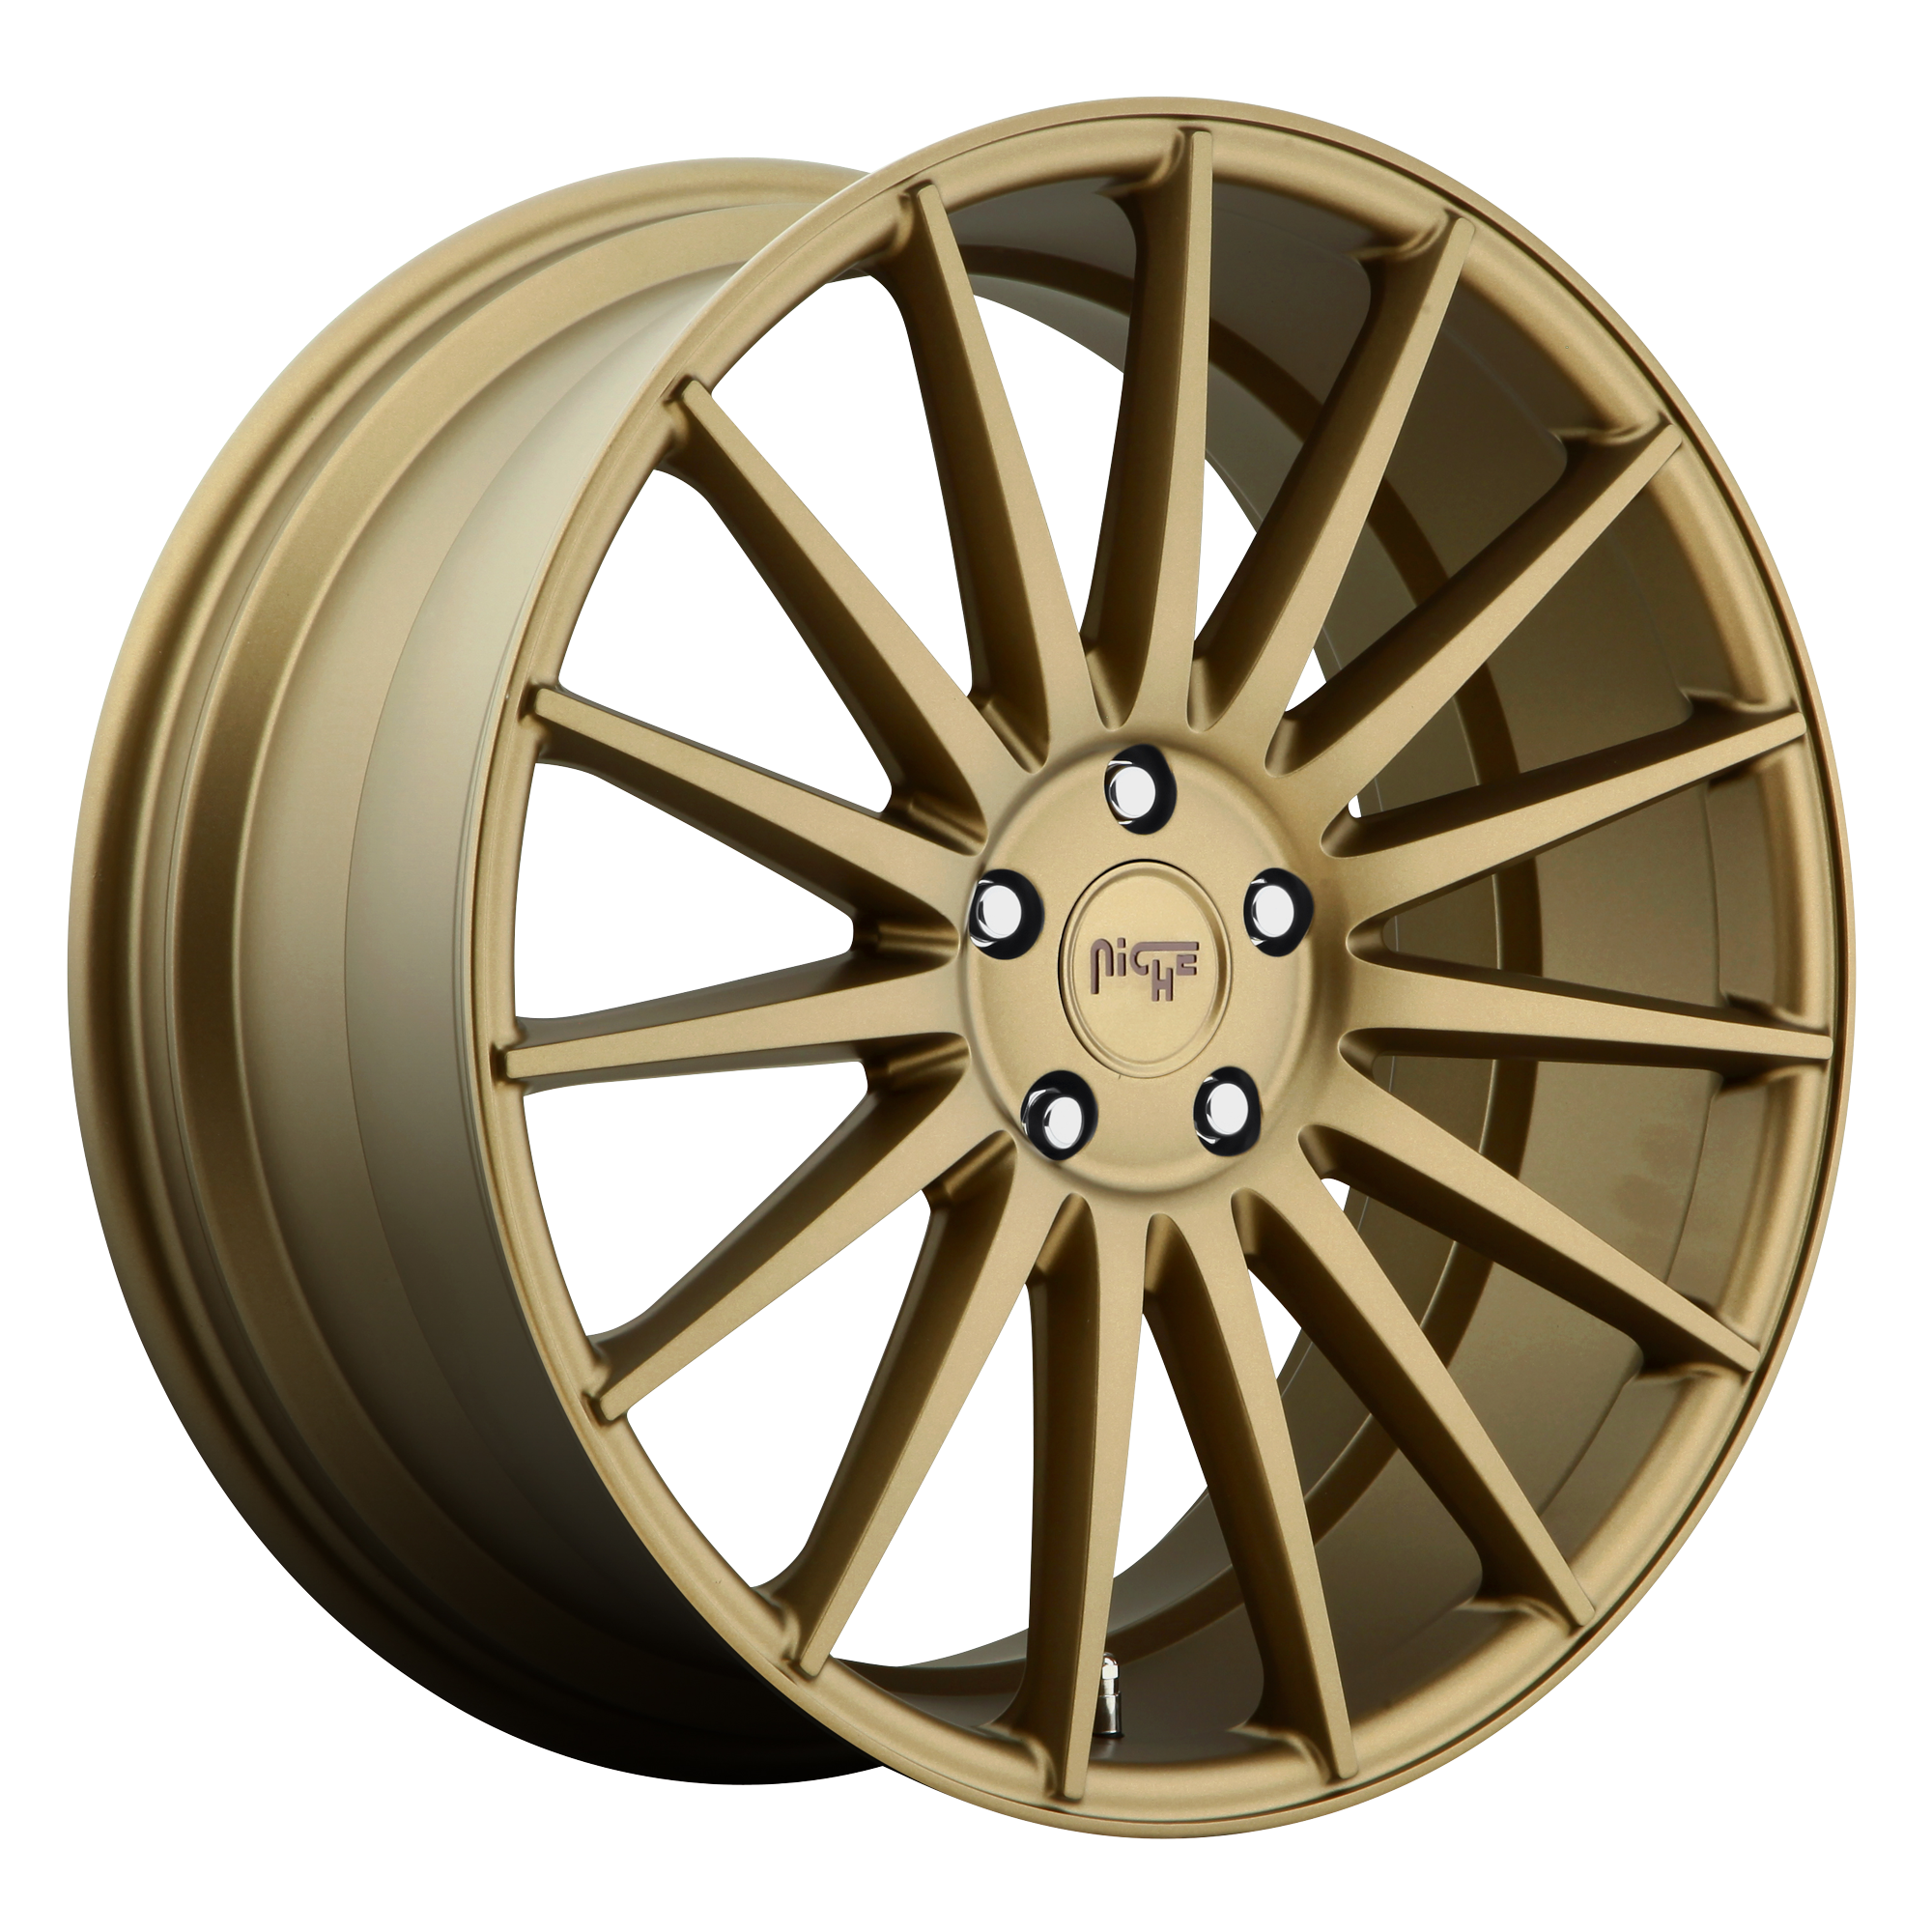 FORM 20x8.5 5x120.00 GLOSS BRONZE (35 mm) - Tires and Engine Performance